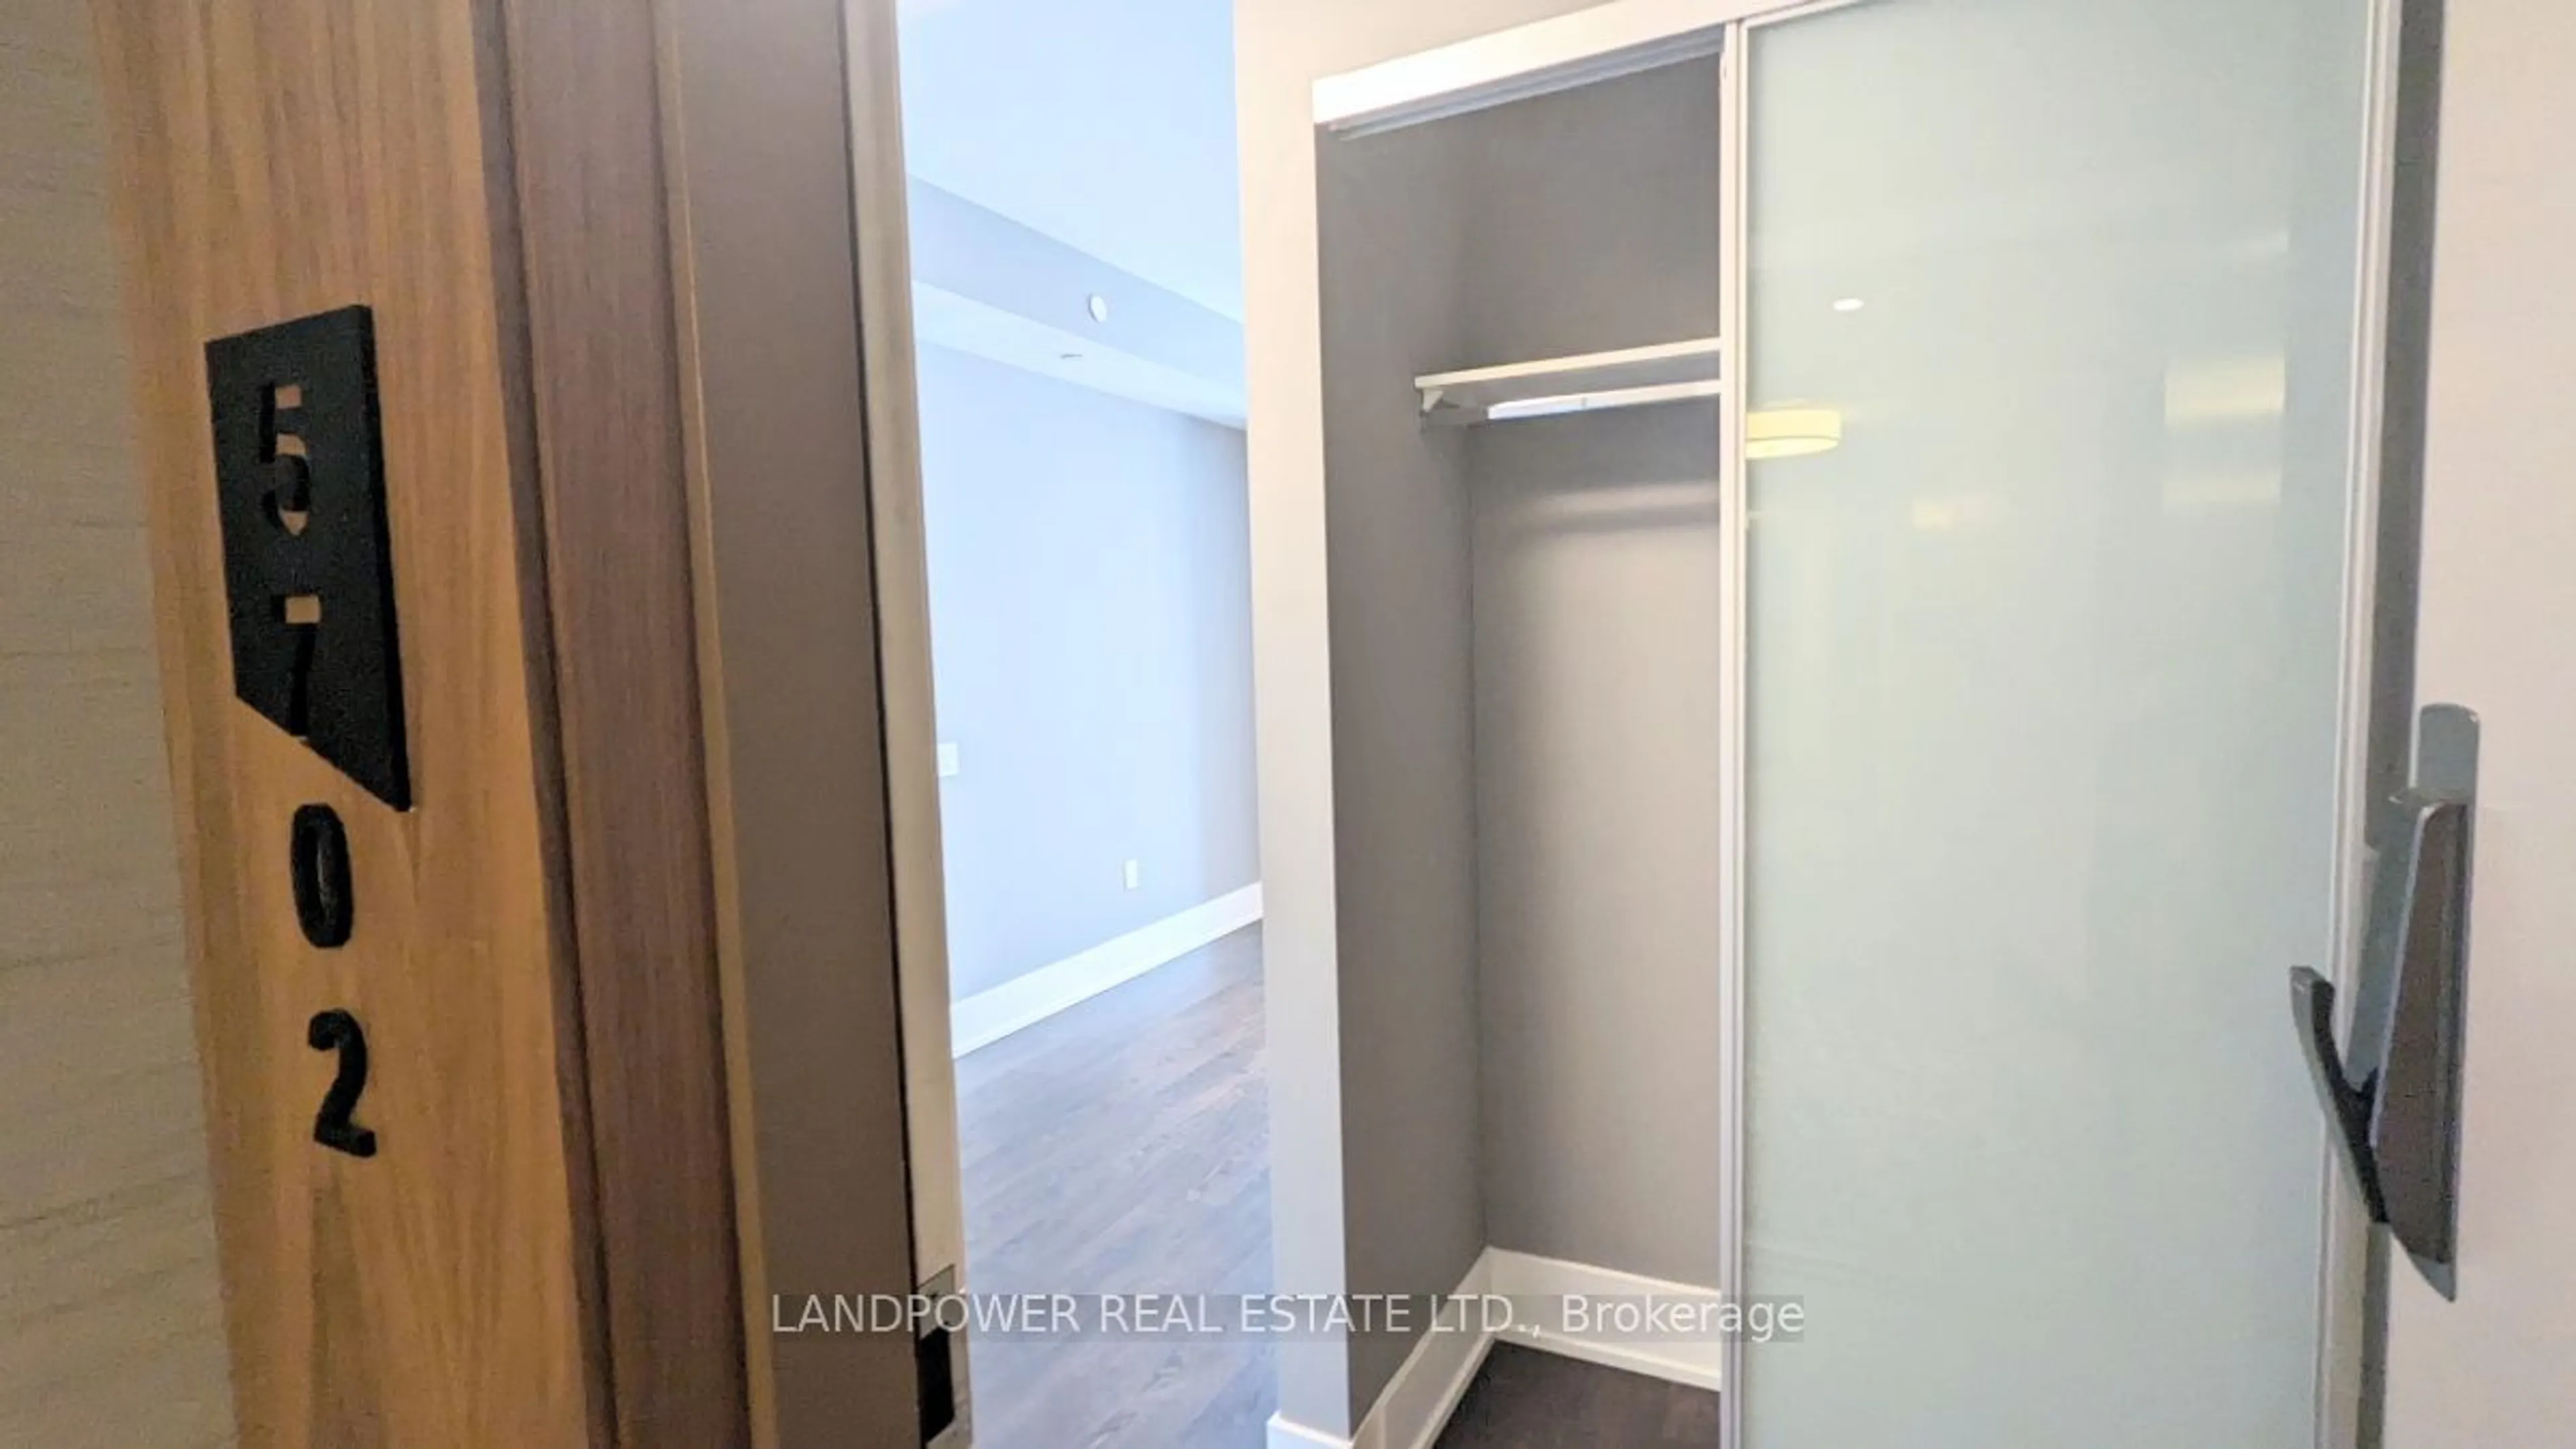 Storage room or clothes room or walk-in closet for 10 York St #5702, Toronto Ontario M5J 0E1